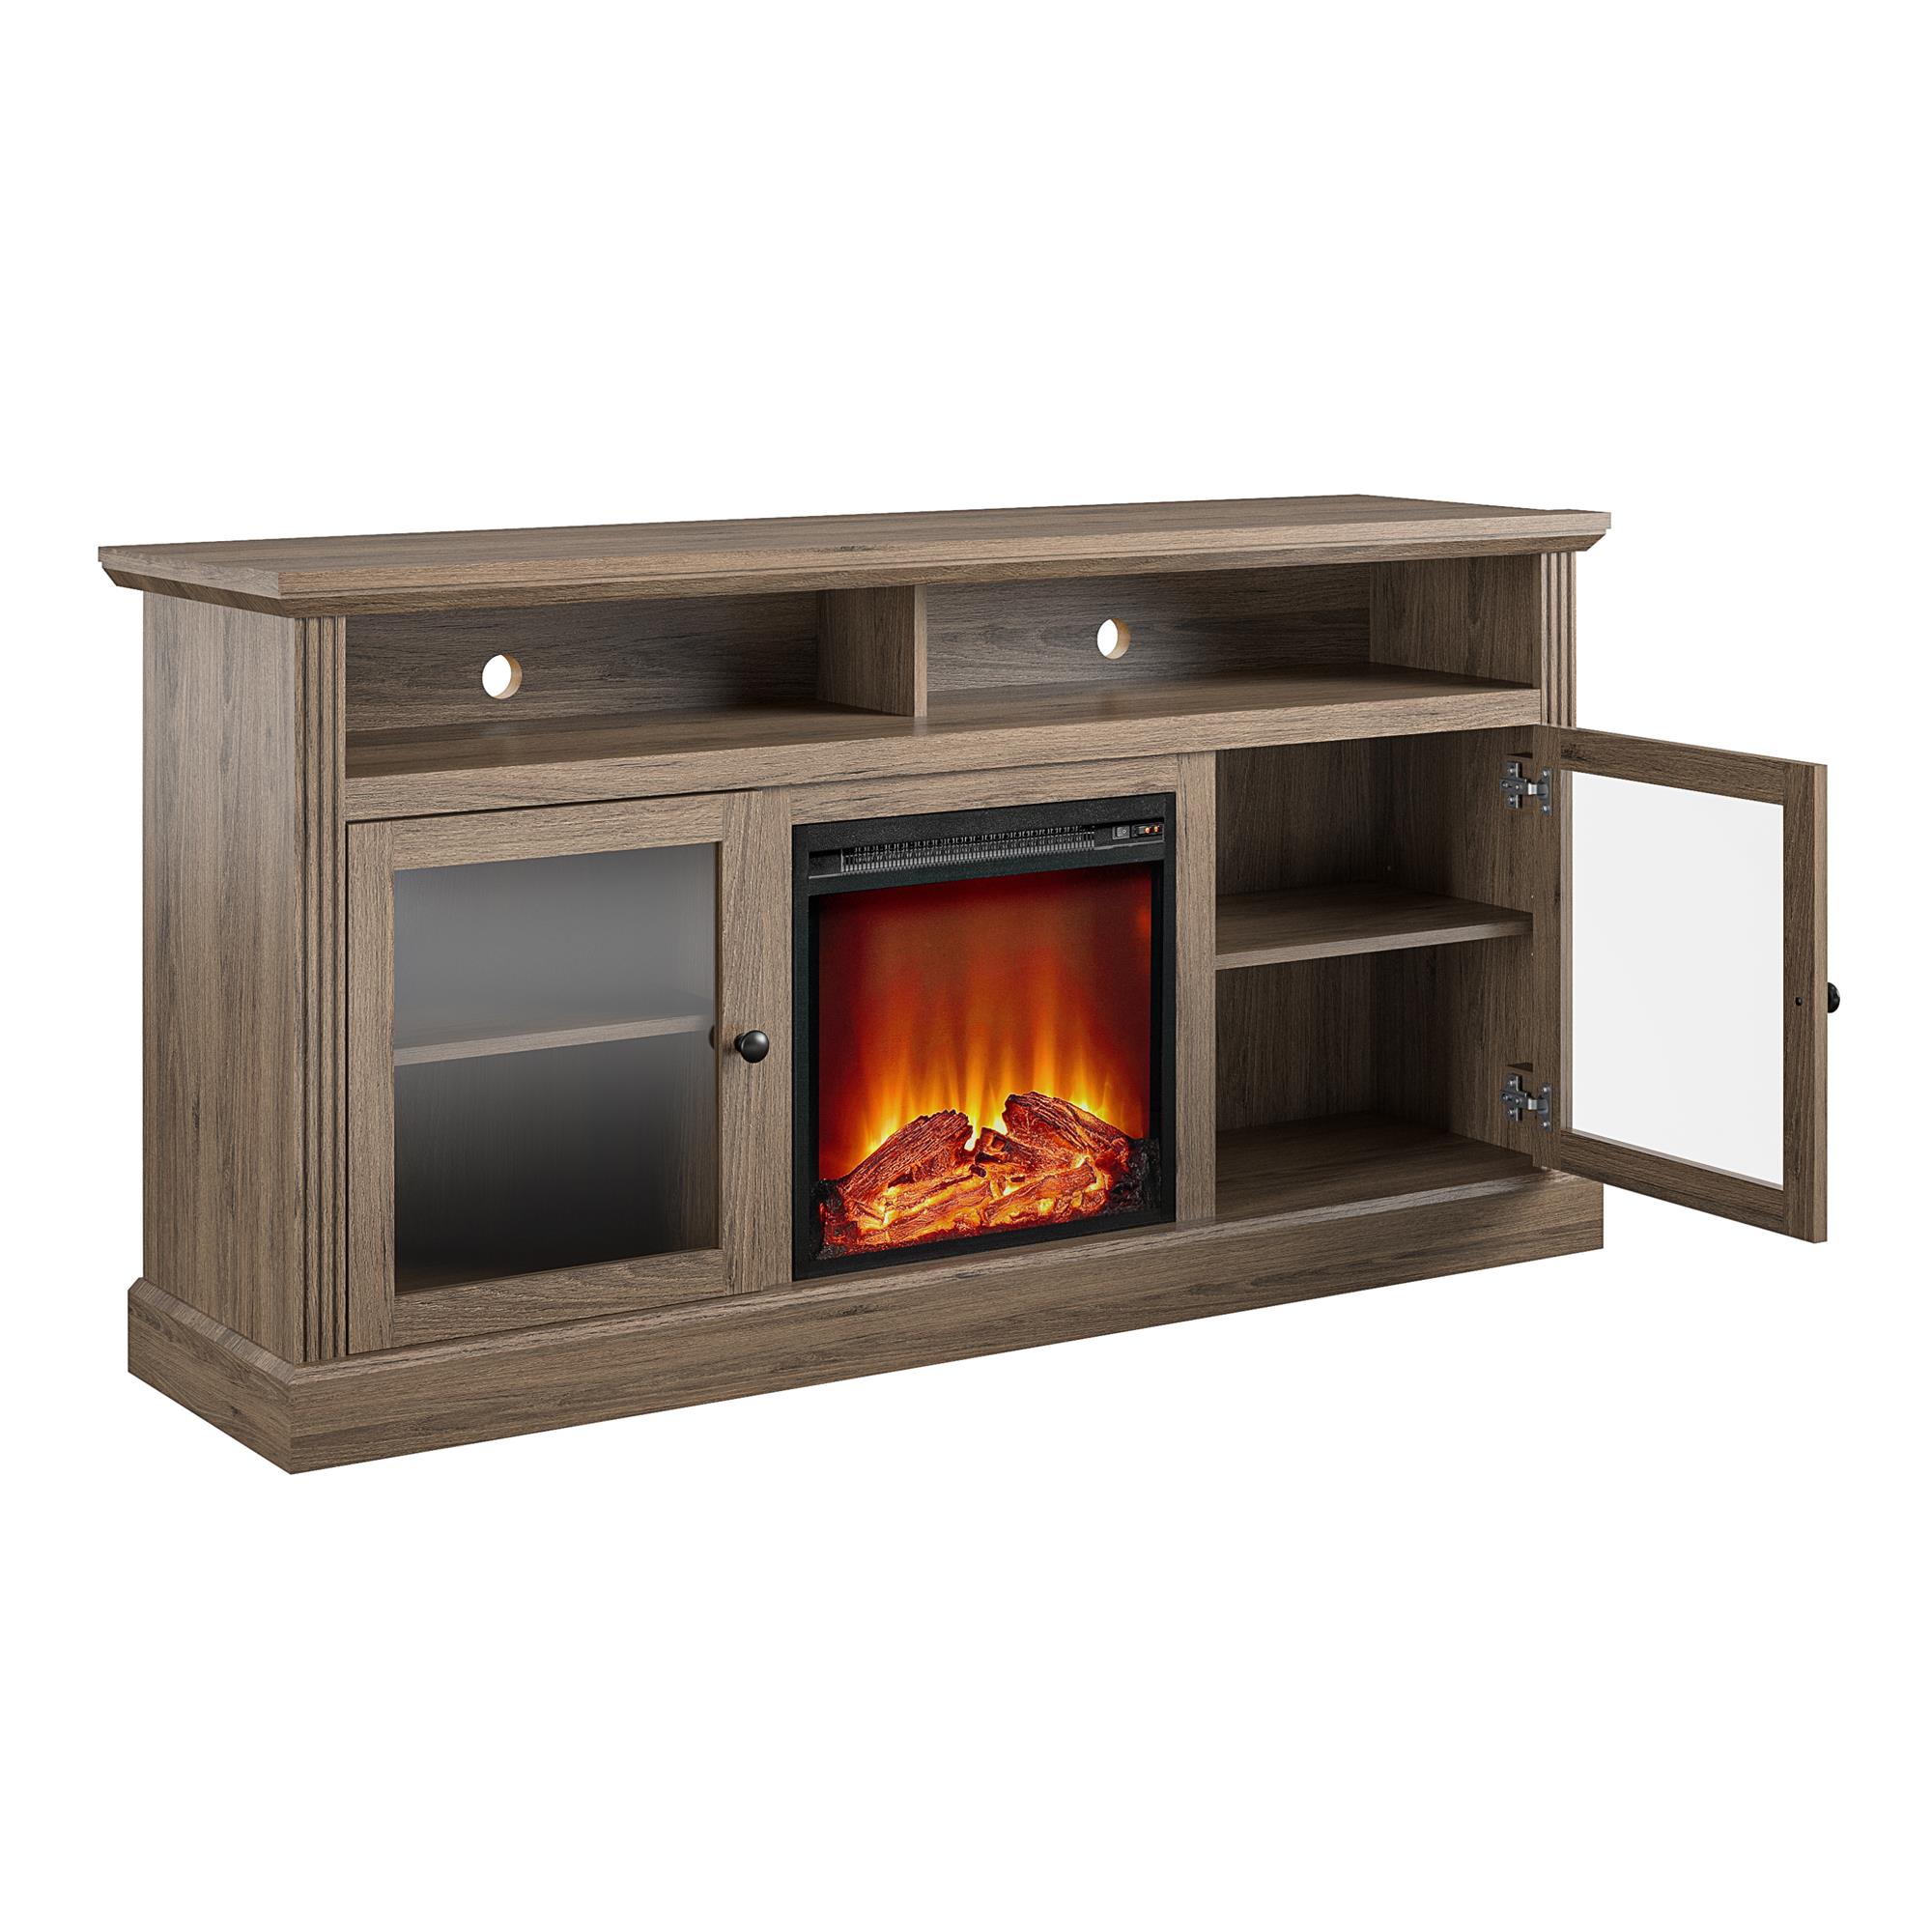 Ameriwood Home Leesburg Fireplace TV Stand for TVs up to 65", Rustic Oak - image 4 of 9